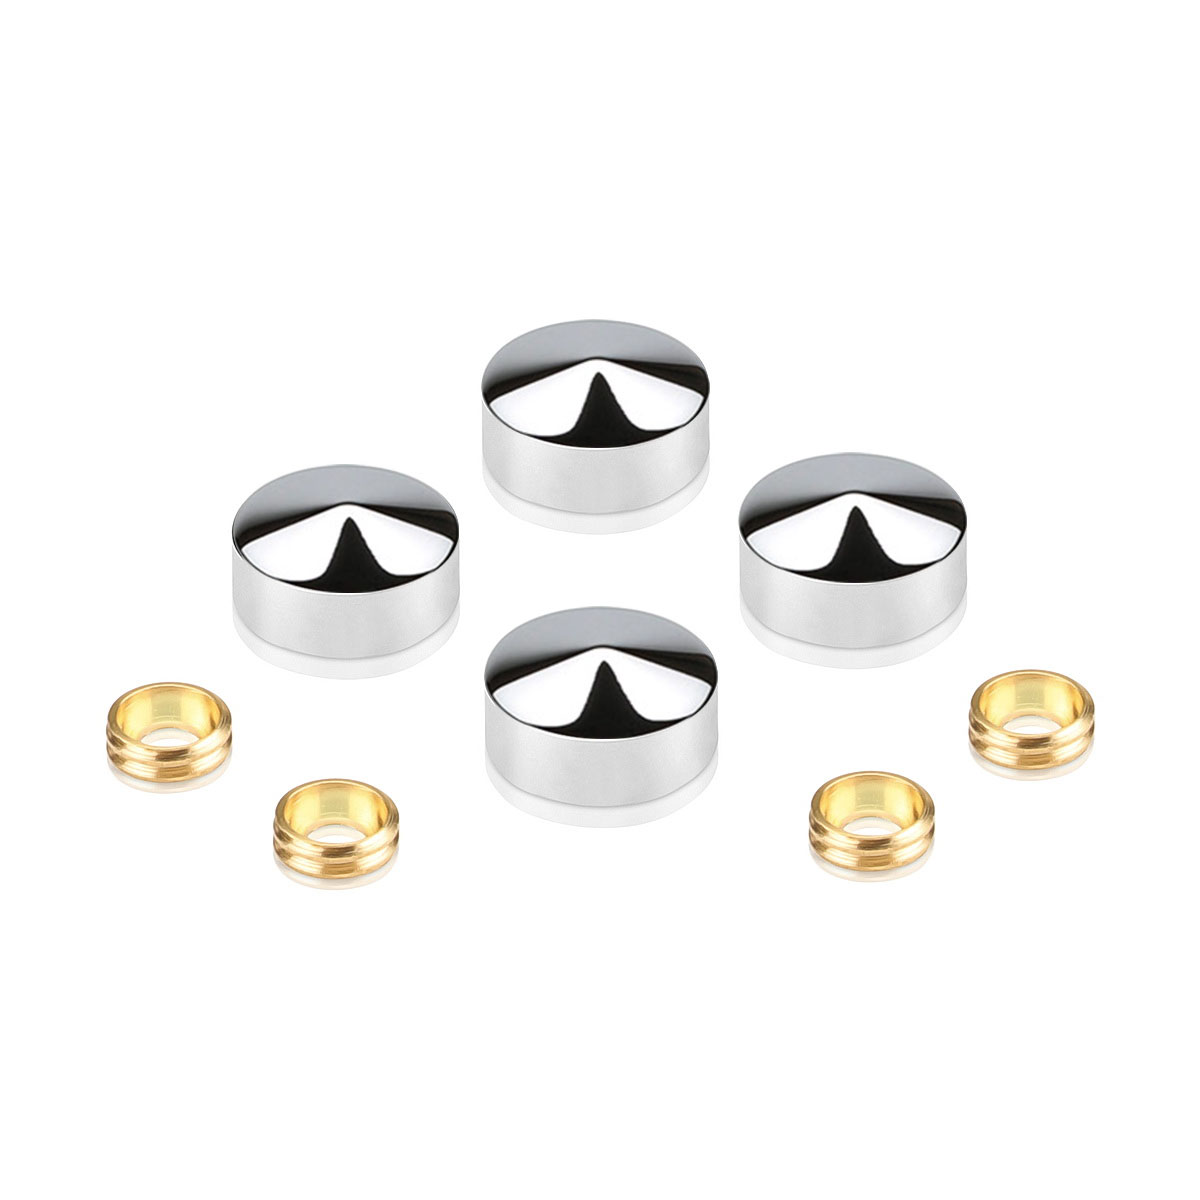 Set of Conical Screw Cover Diameter 11/16'', Polished Stainless Steel Finish (Indoor Use Only)